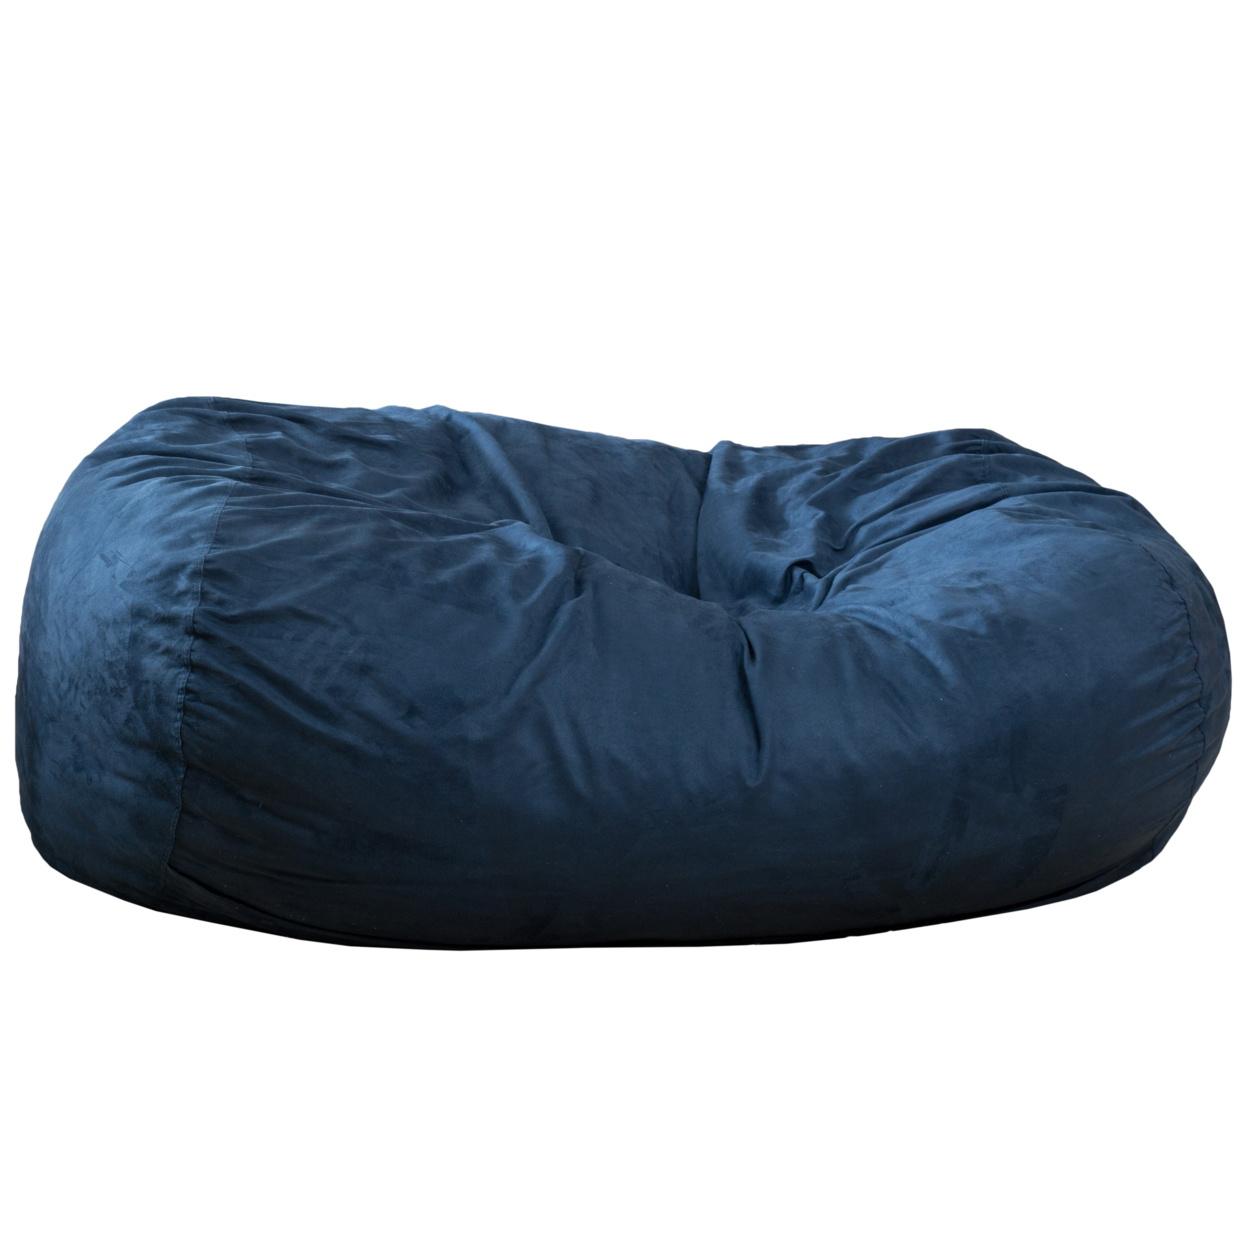 Flora Traditional 6.5 Foot Suede Bean Bag (Cover Only), Charcoal - Midnight Blue